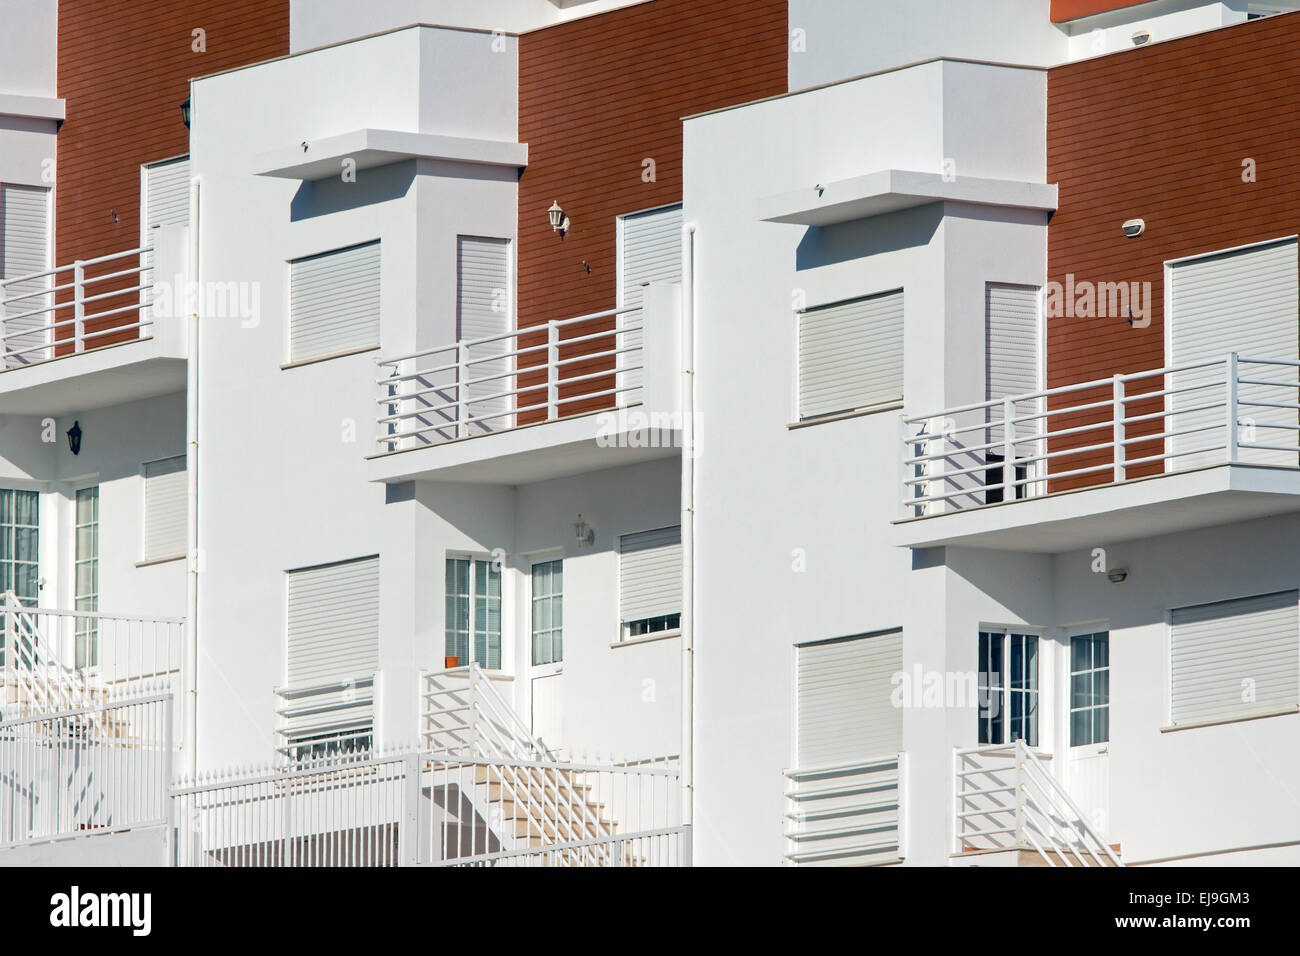 Detail of some holiday flats Stock Photo